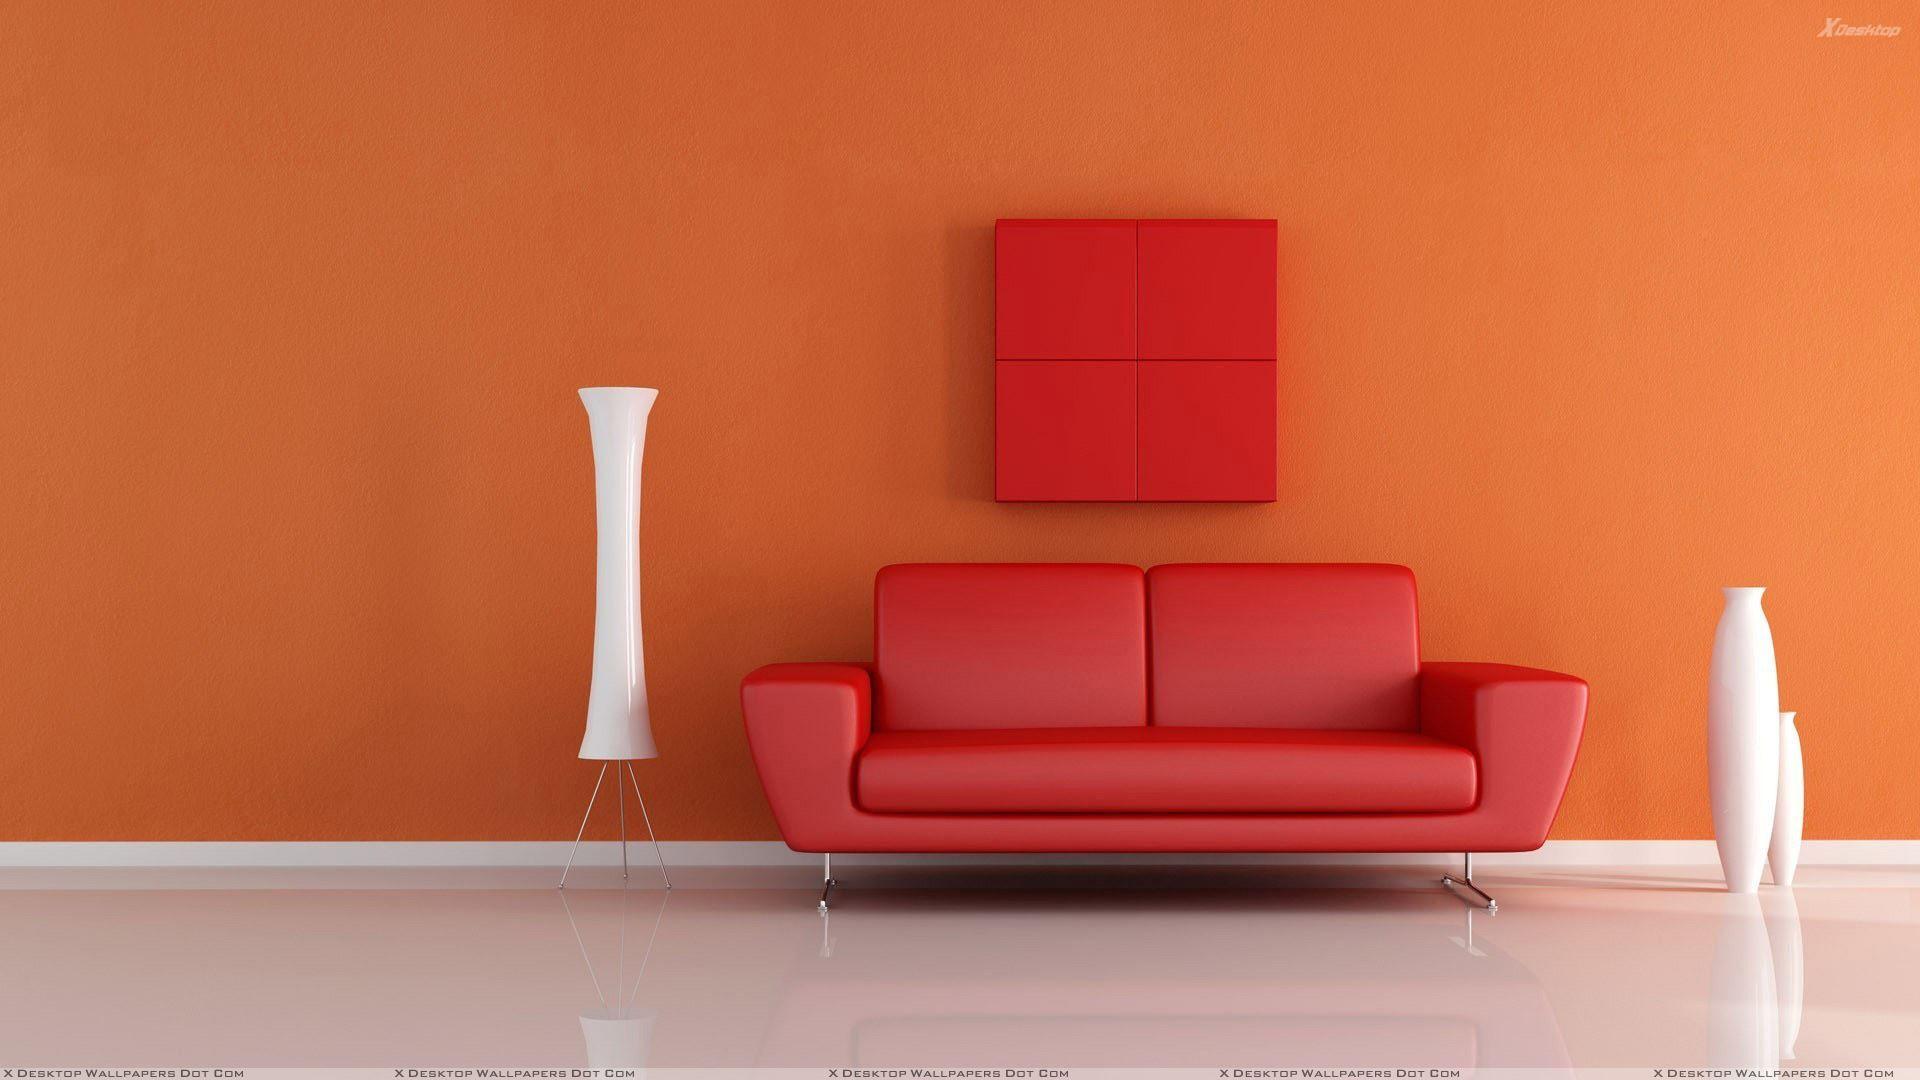 Red Sofa Wallpaper, Photo & Image in HD